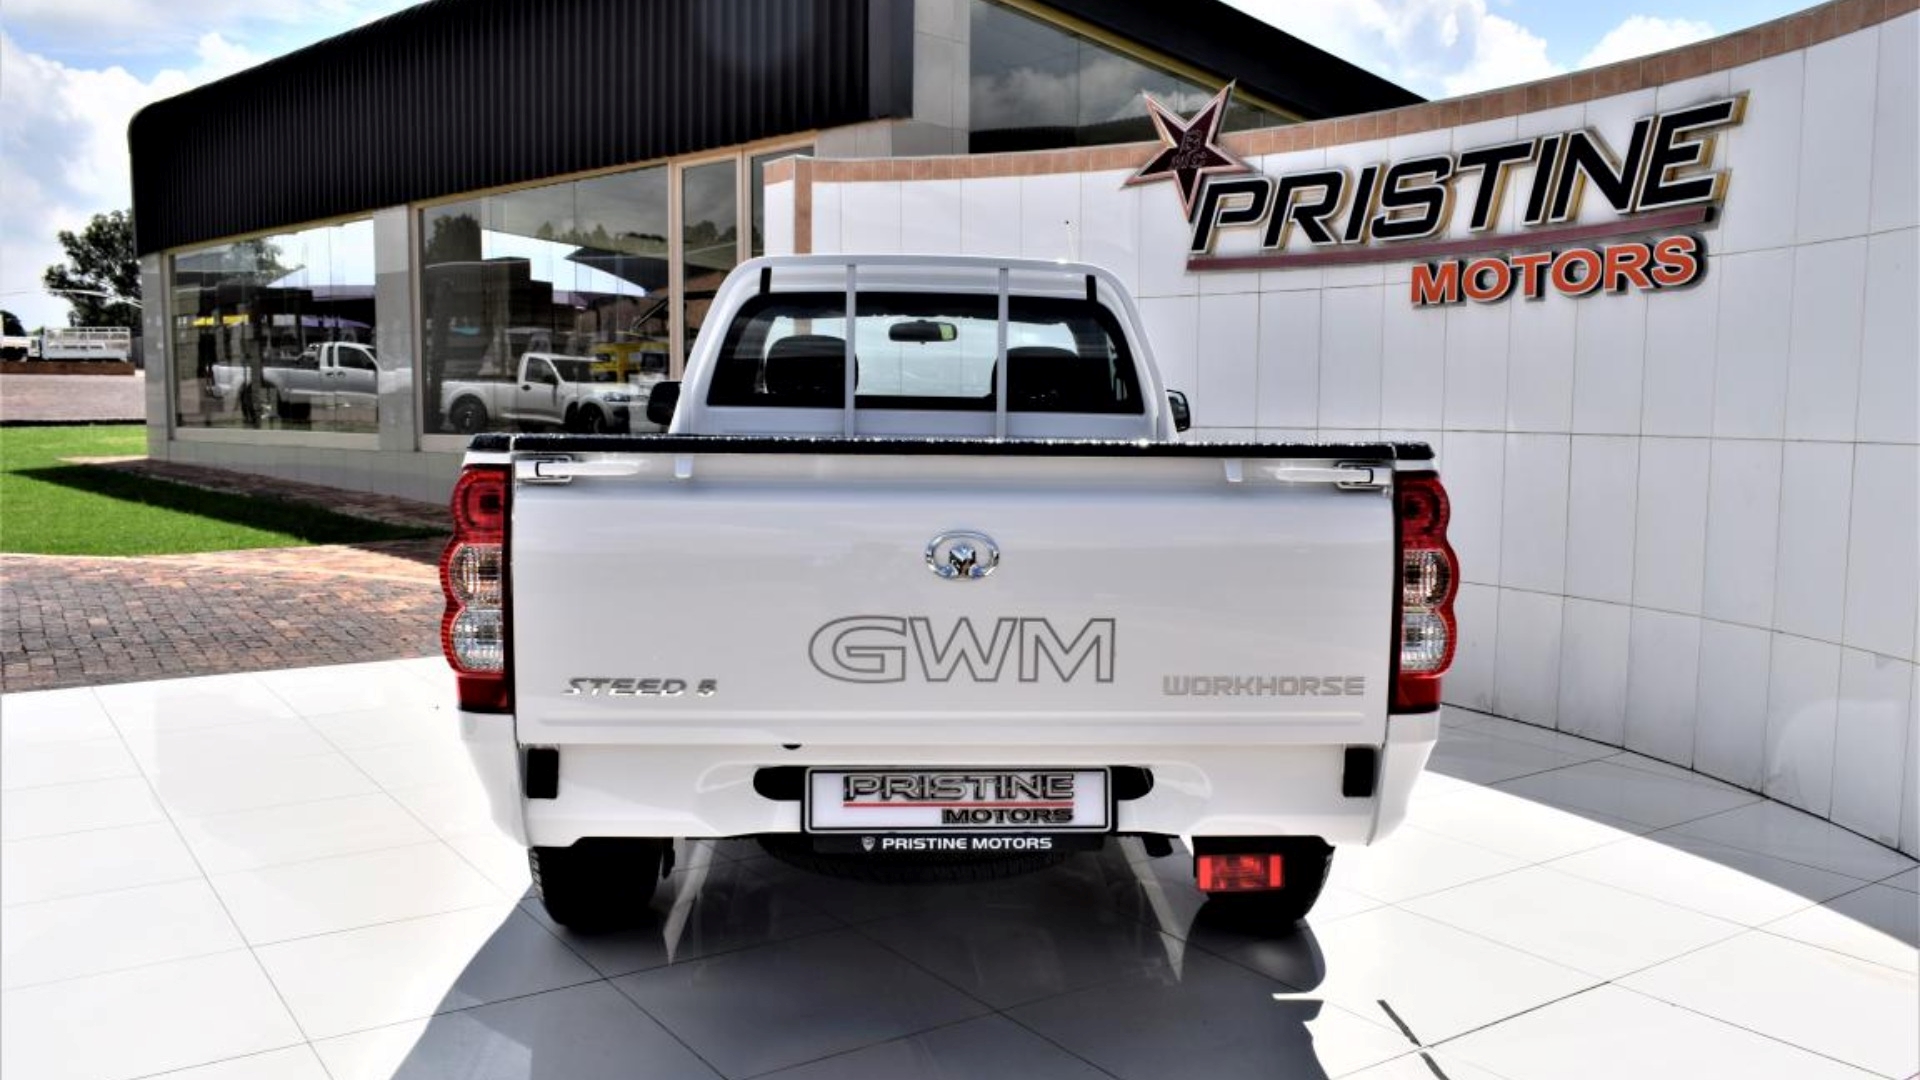 GWM LDVs & panel vans Steed 5 2.2 MPi Workhorse Single Cab 2022 for sale by Pristine Motors Trucks | Truck & Trailer Marketplaces